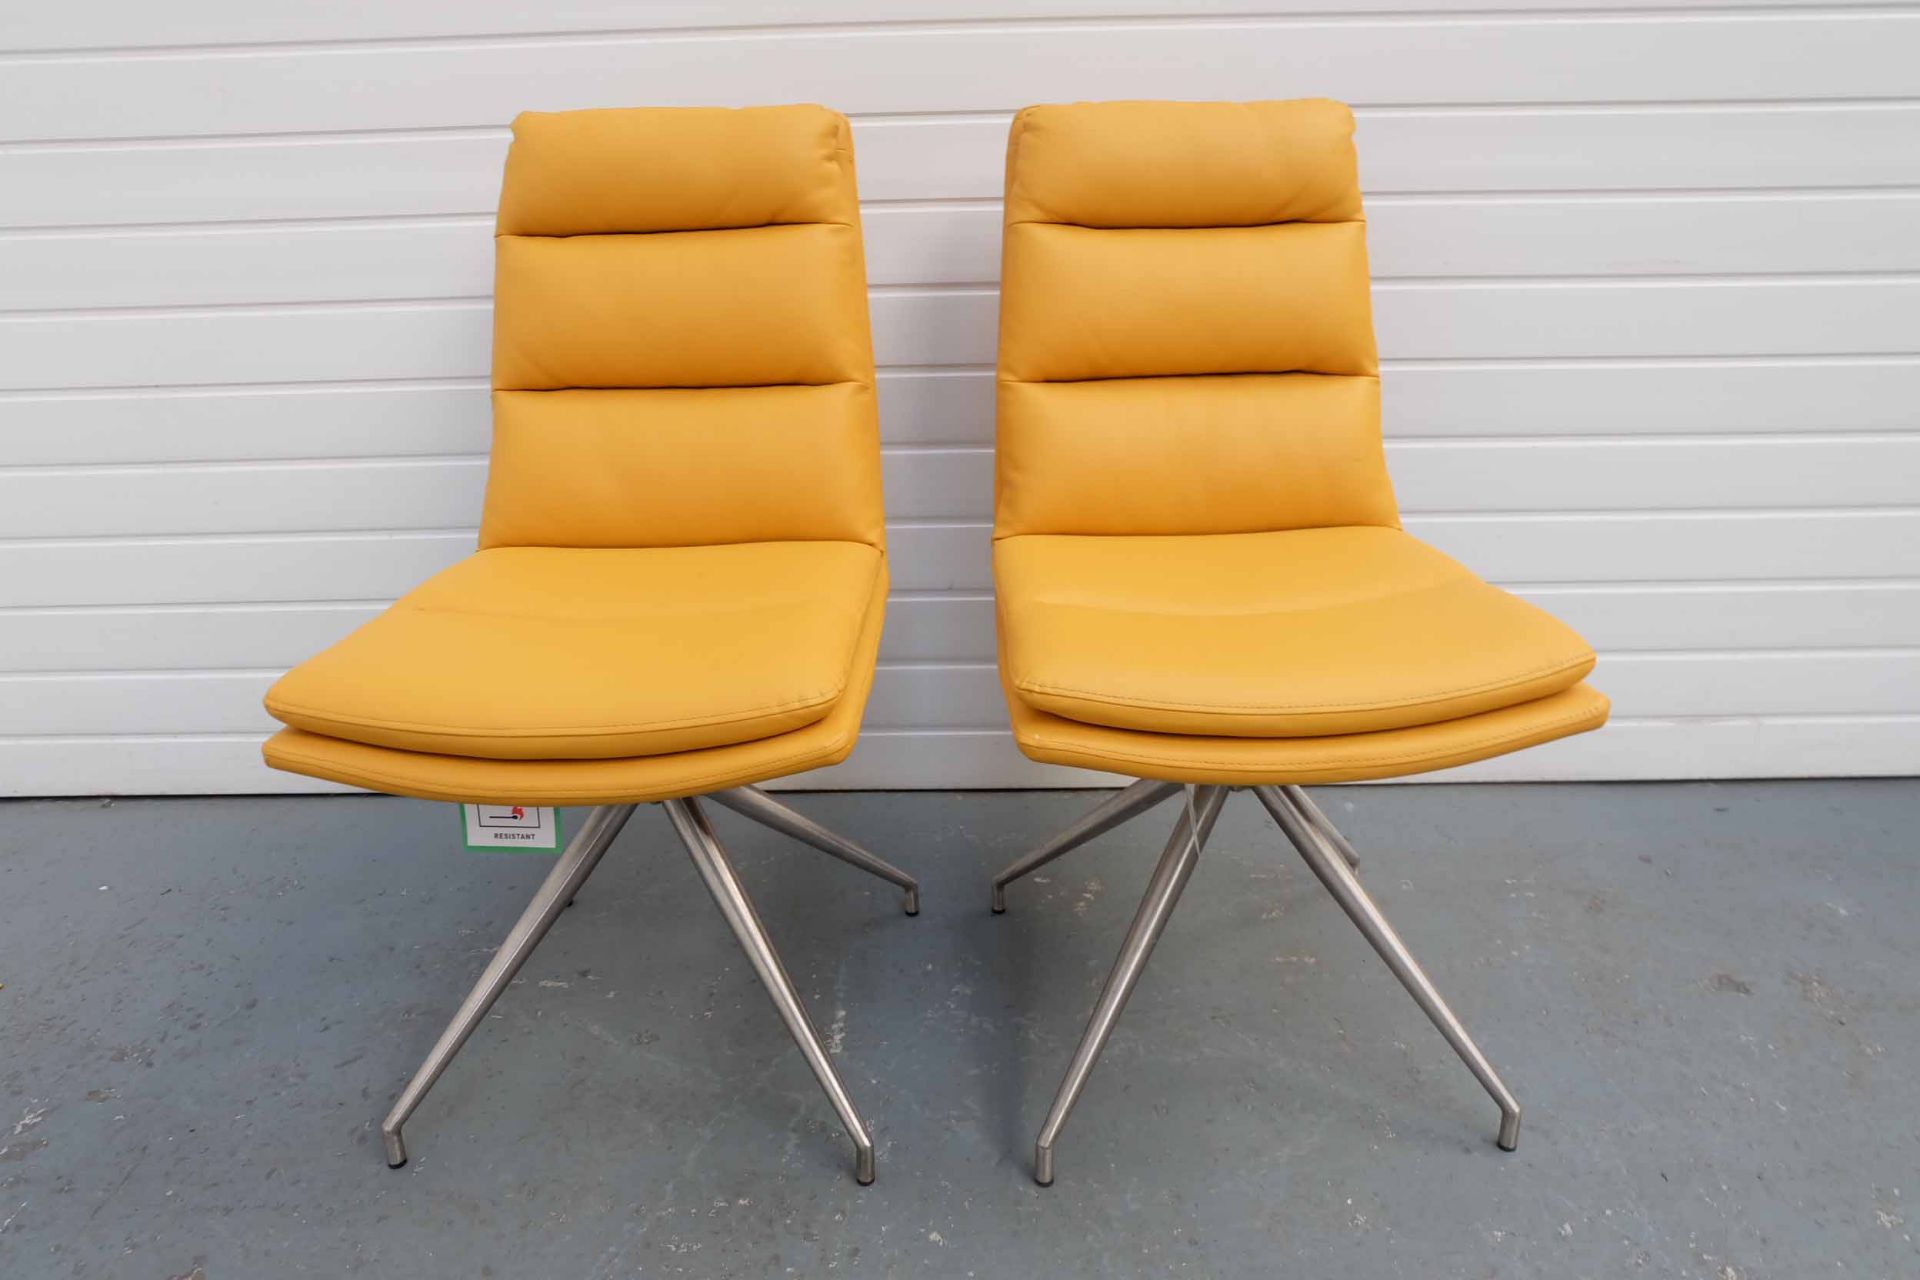 Pair of Furniture Link 'Nobo' Swivel Chairs. Faux Leather Ochre Seat on Brushed Steel Legs.